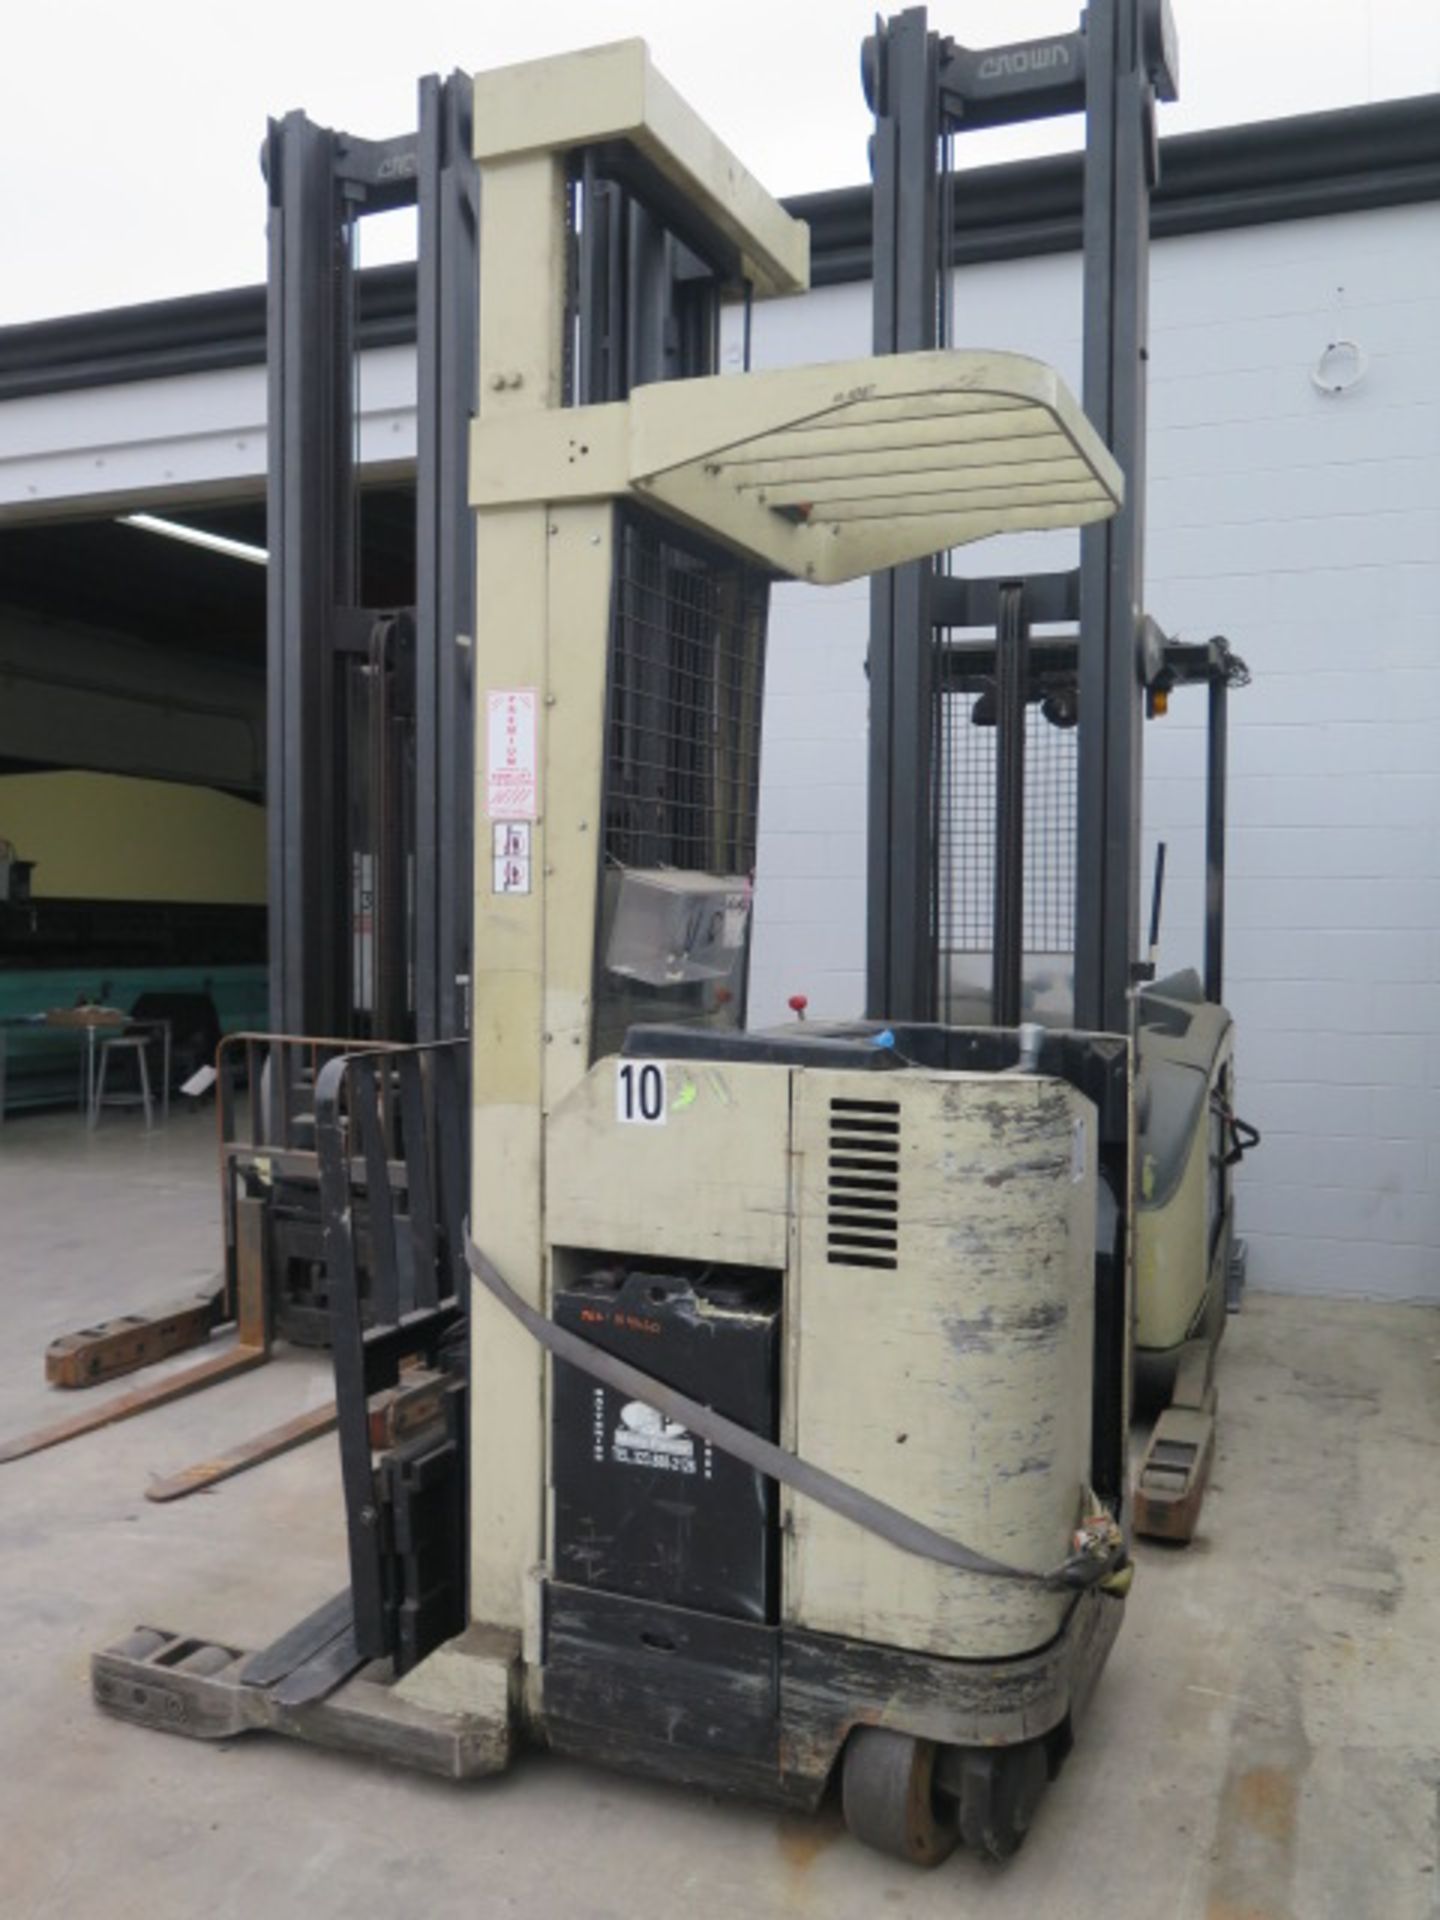 Crown 35RRTT 3500 Lb Cap Stand-In Electric Reach Forklift s/n 1A116462 w/ 3-Stage Mast, SOLD AS IS - Image 3 of 11